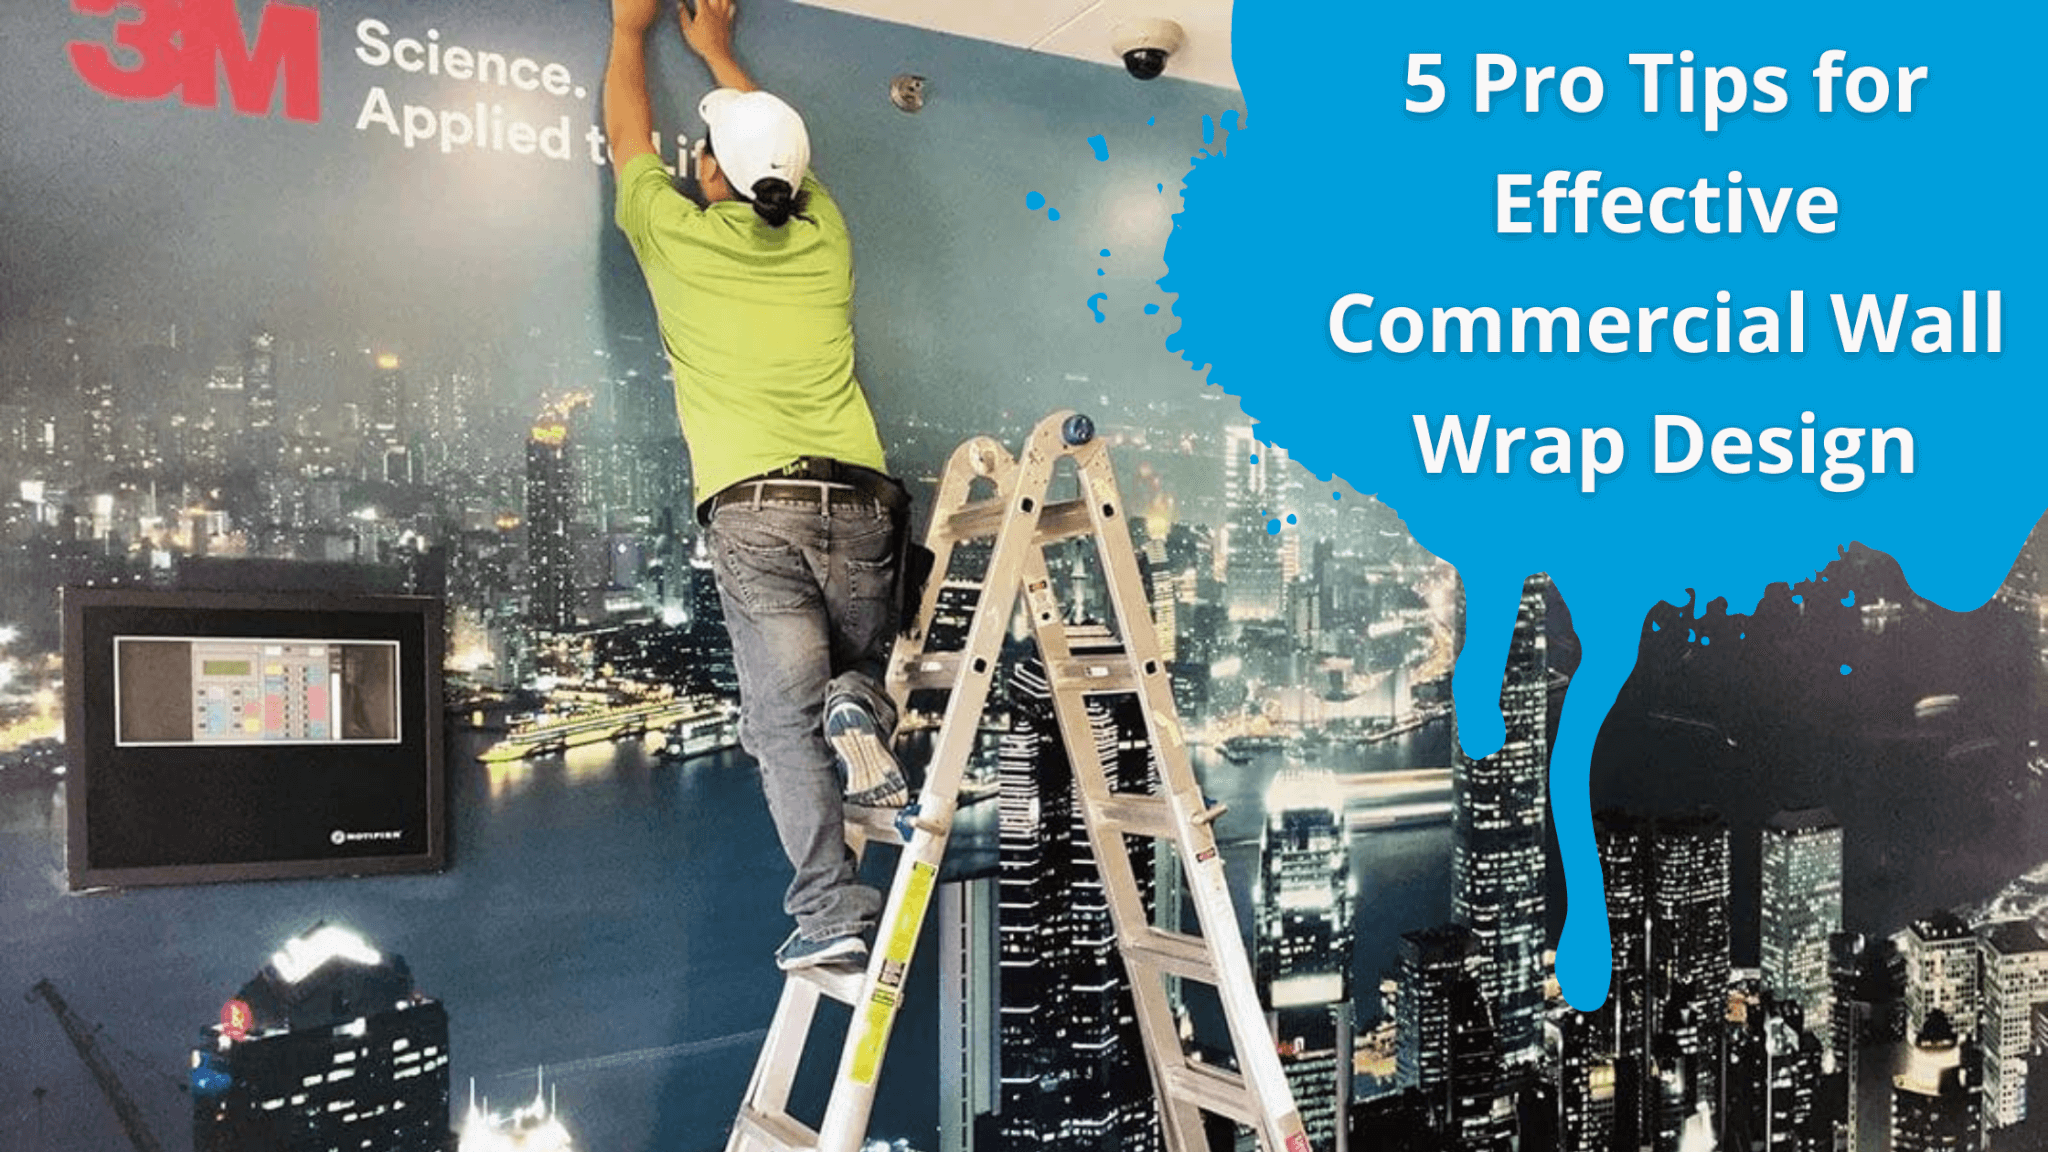 5 Pro Tips for Effective Commercial Wall Wrap Design